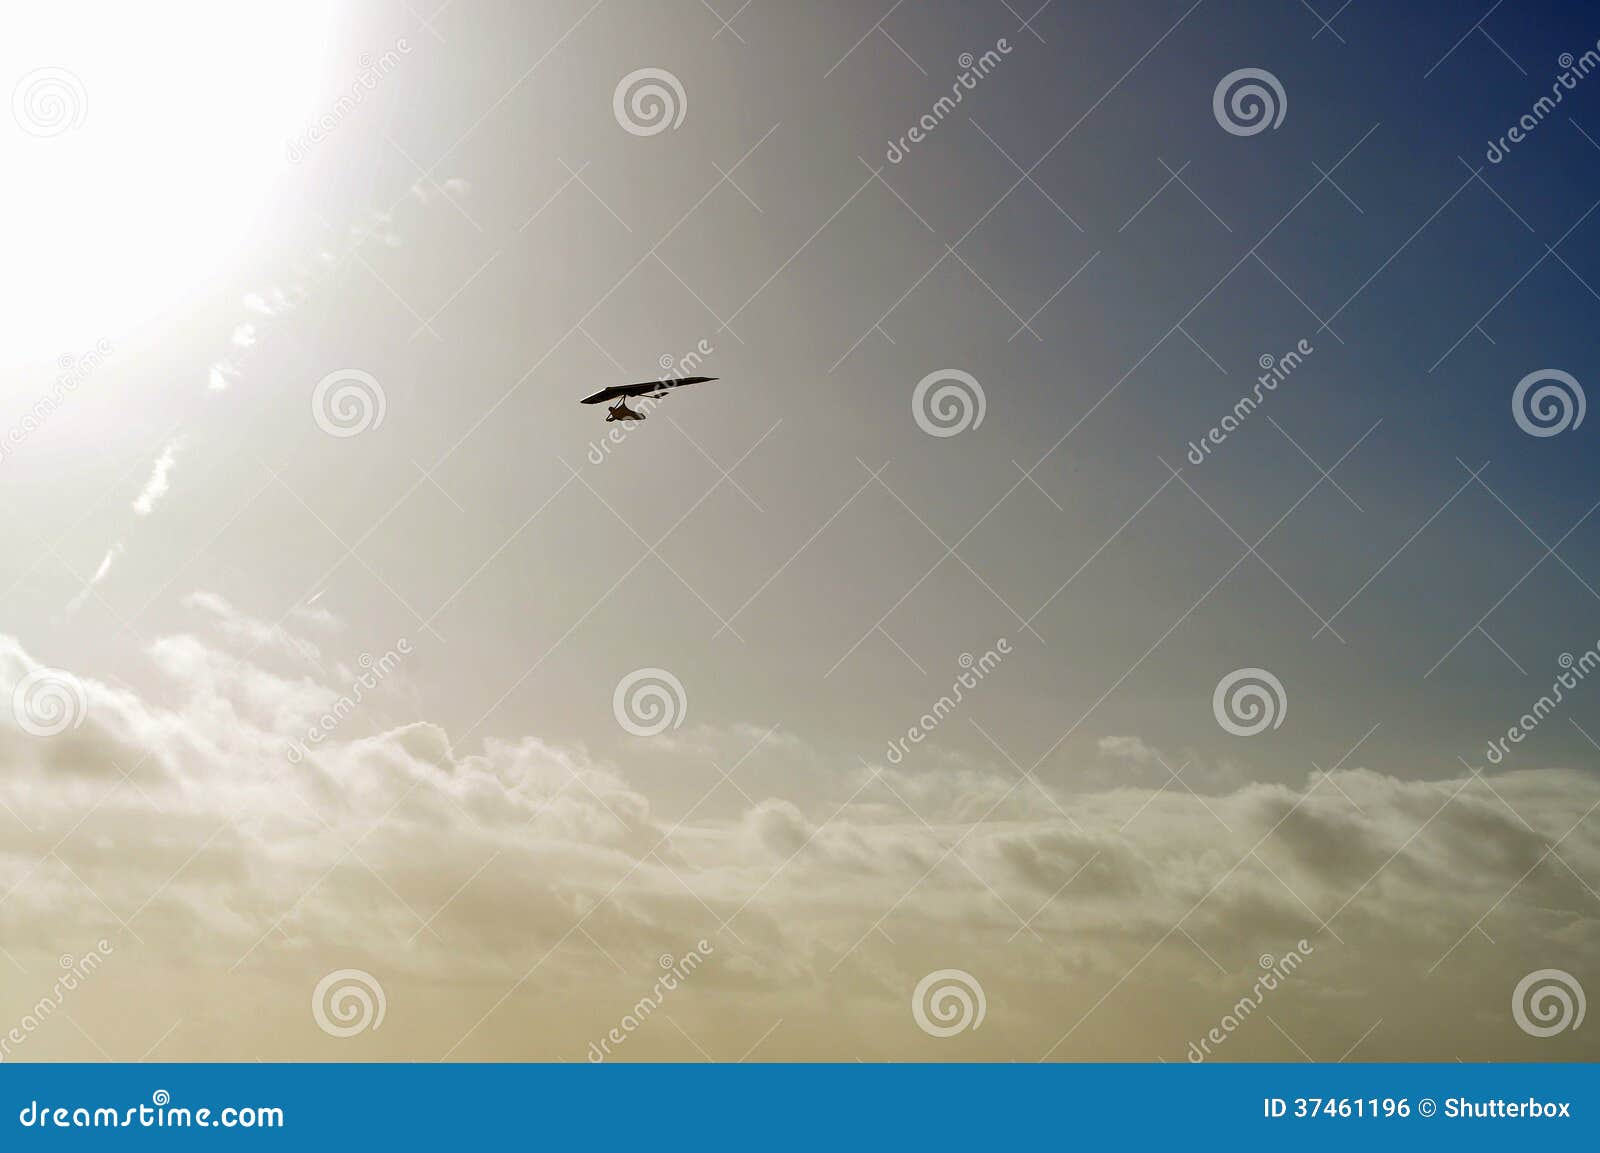 silhouette of paraglider in air